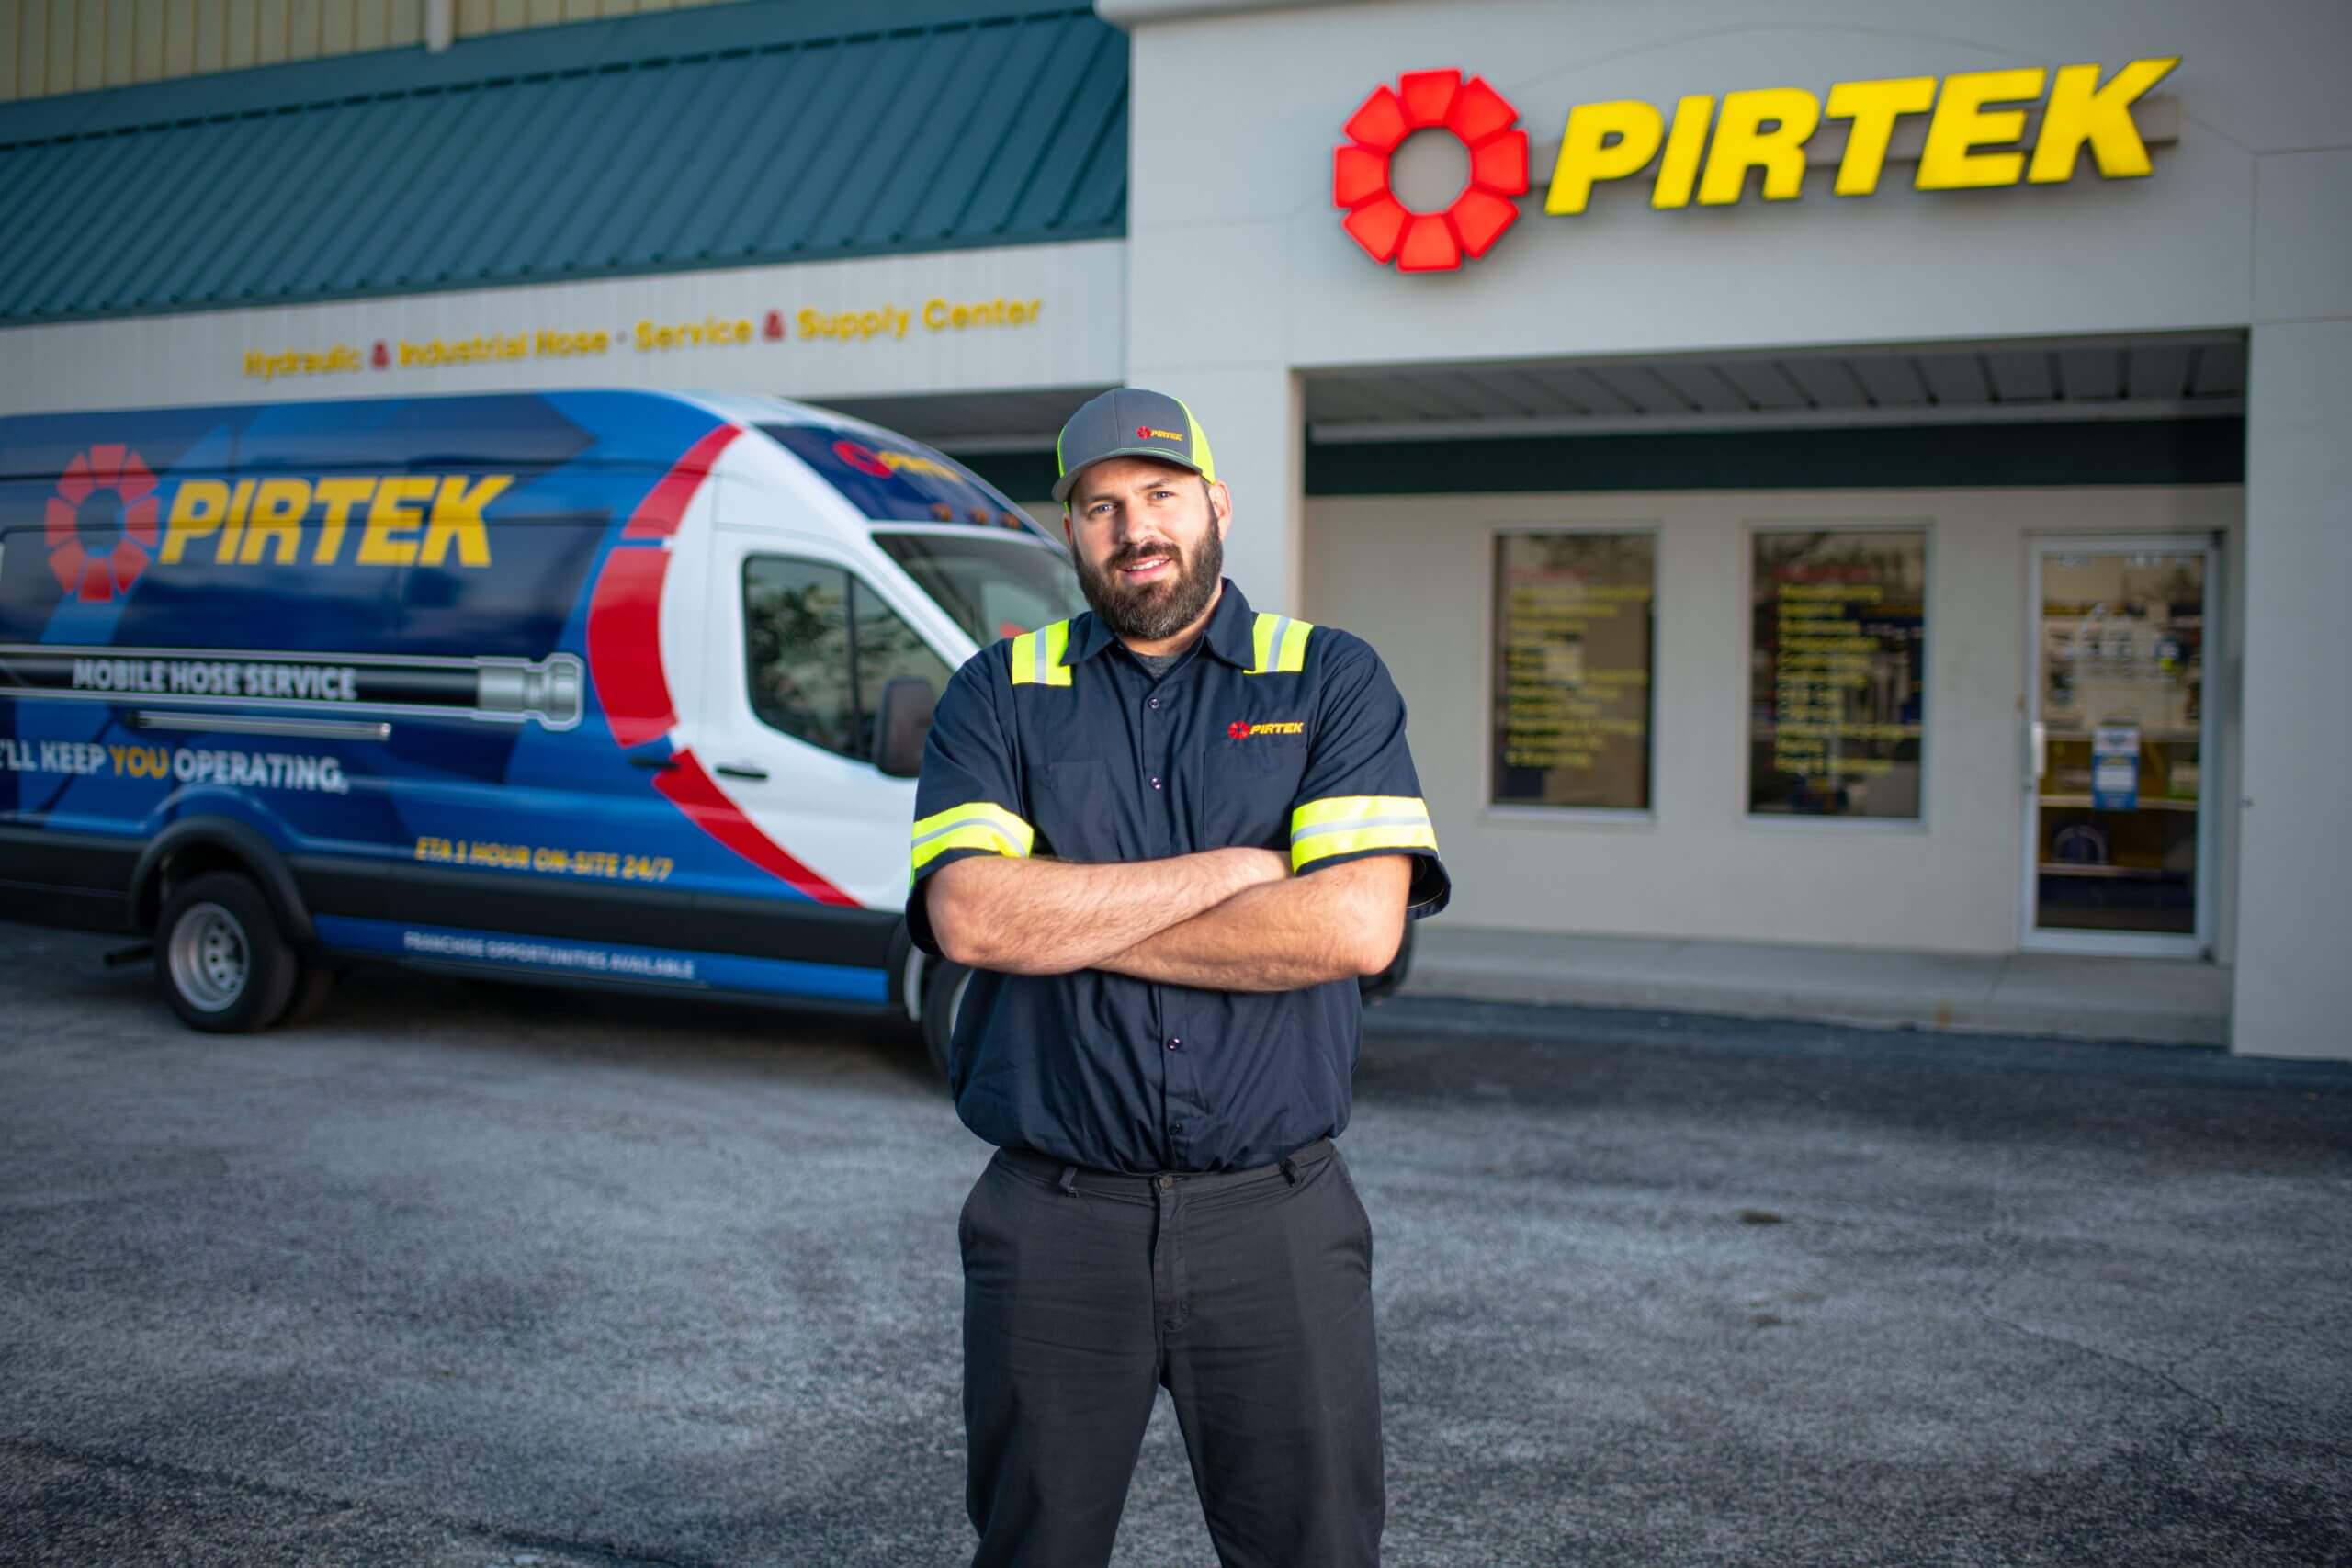 Tap into a Lucrative Business Opportunity with PIRTEK Hydraulic Hose Franchise.